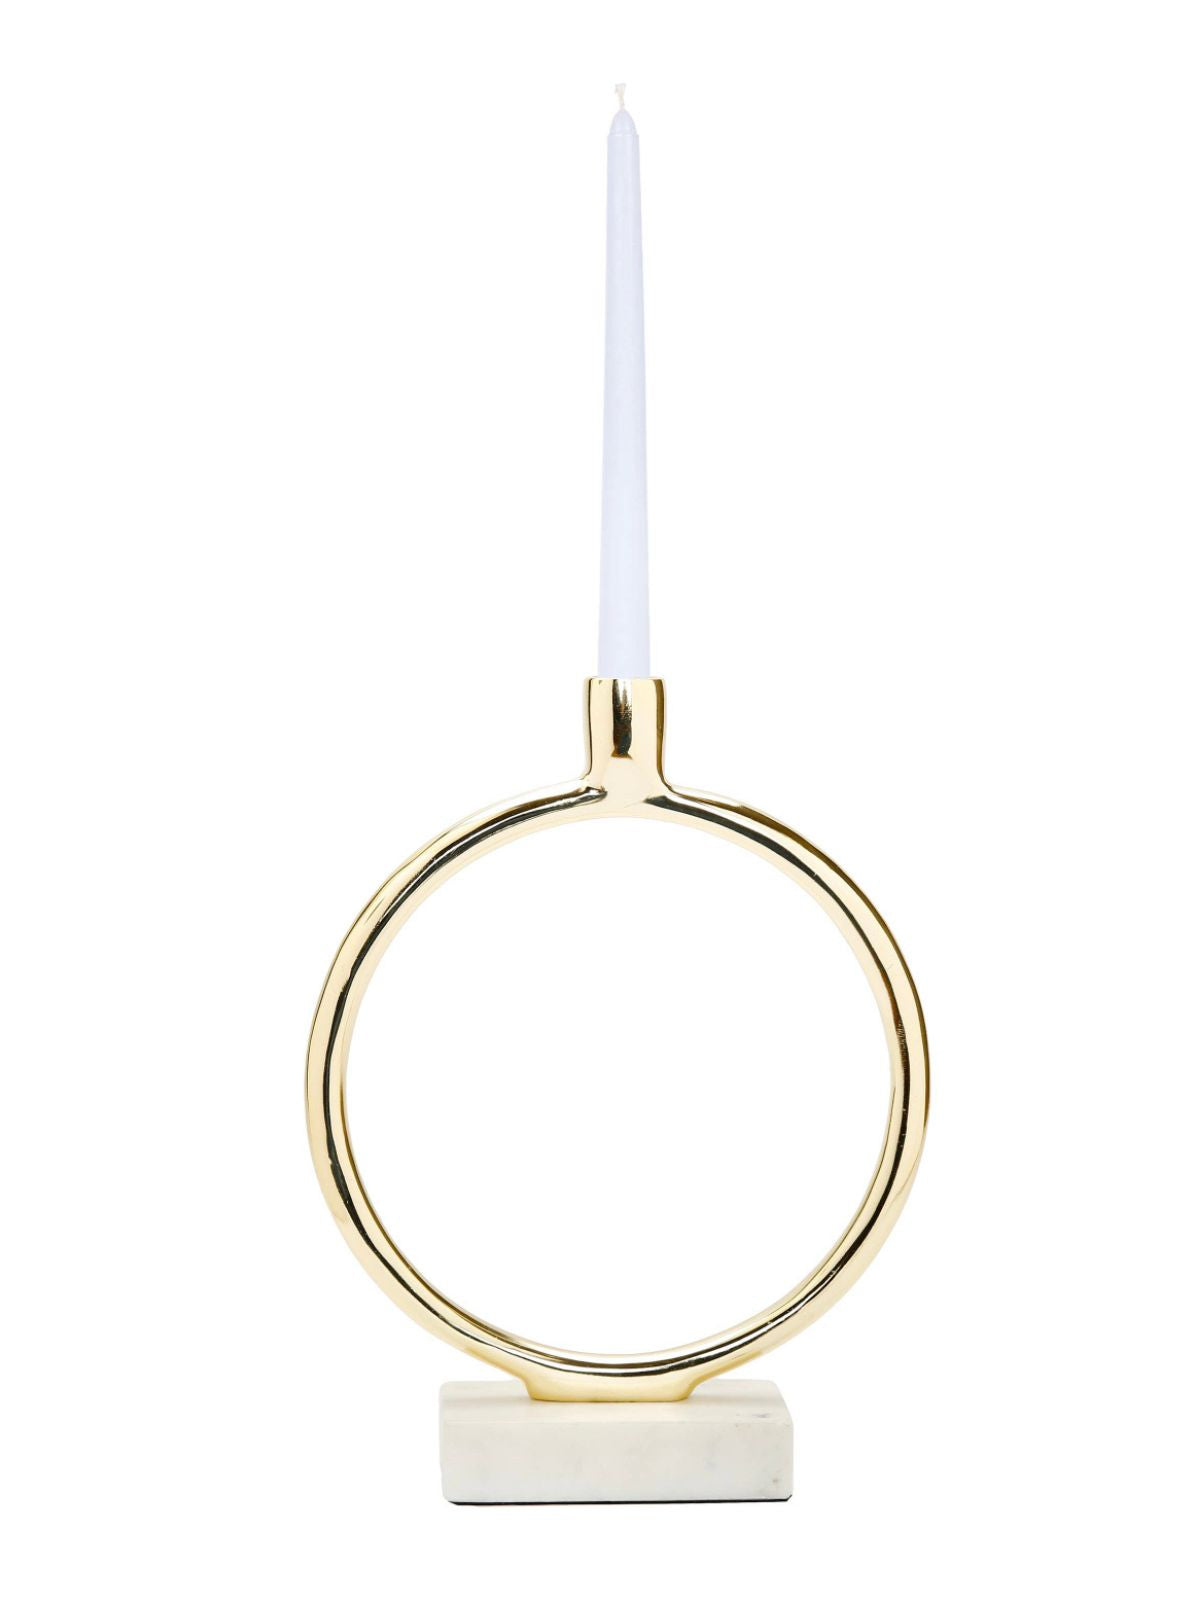 Gold Metal Circular Taper Candle Holder on Marble Base. Available in 2 sizes, Sold by KYA Home Decor